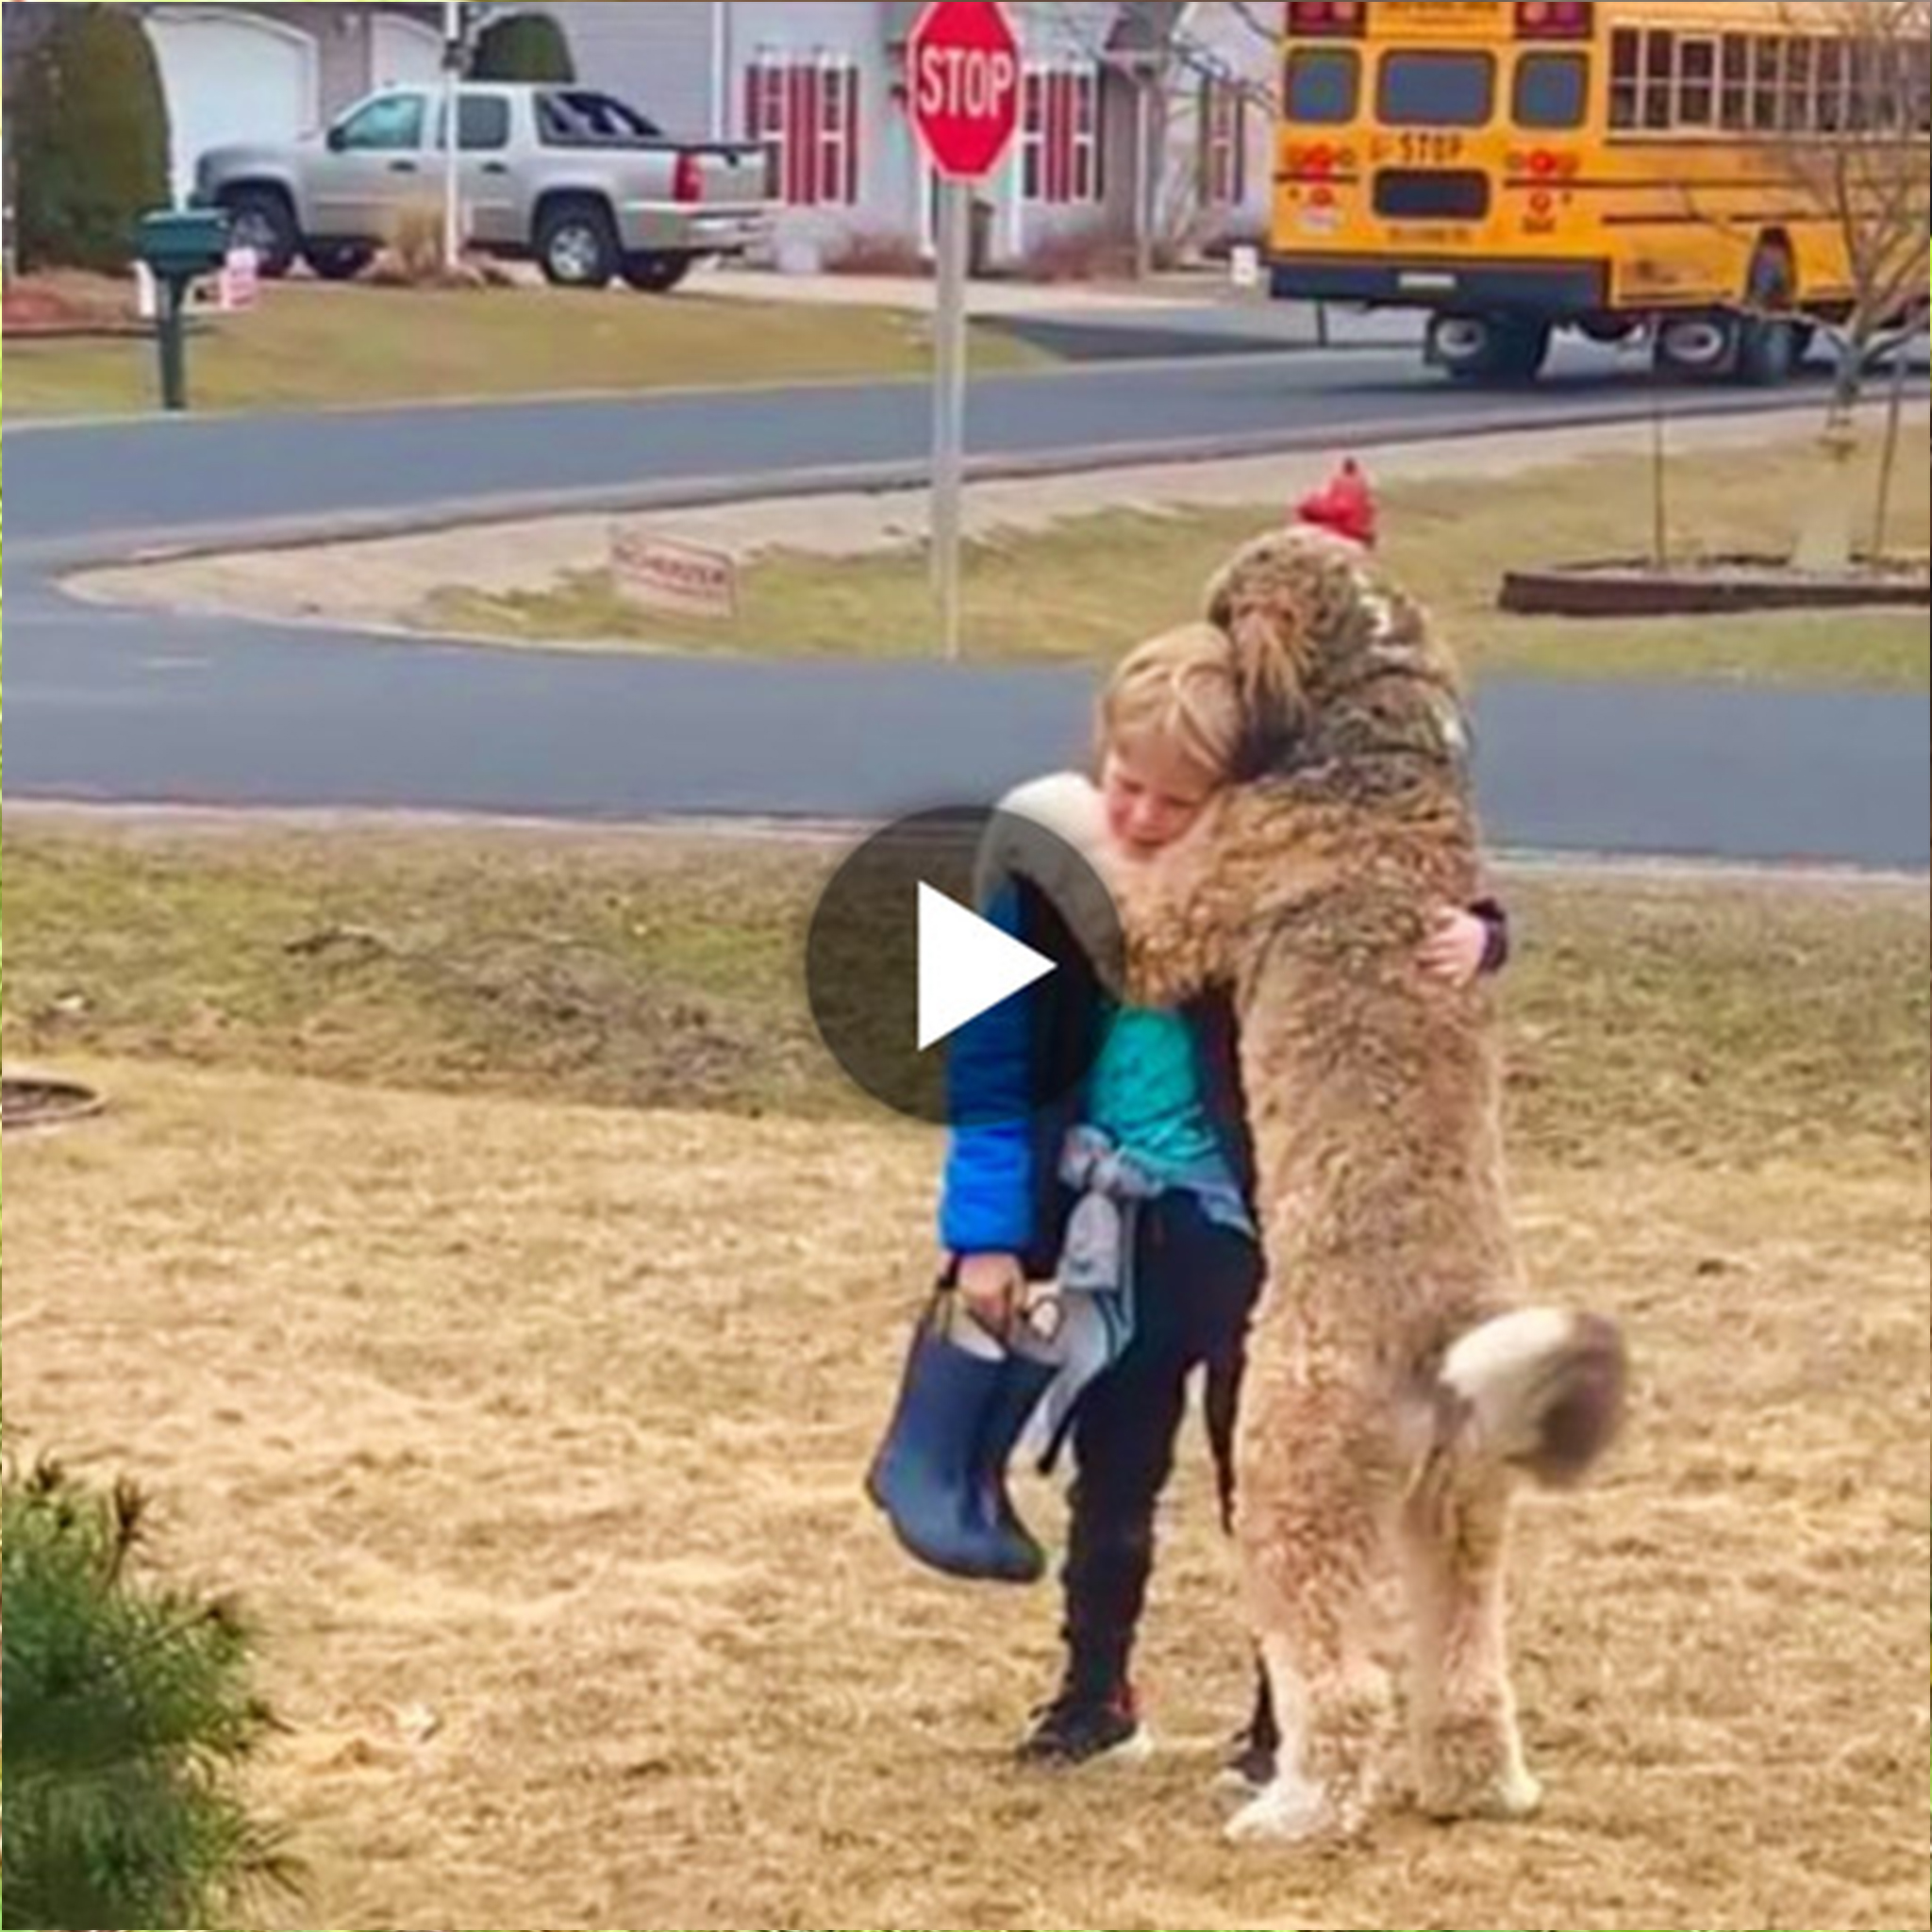 “True Canine Friendship: Warming Hug Warms Viewers’ Hearts as Loving Dog Walks 3km to Pick Up 8-Year-Old Child After School”